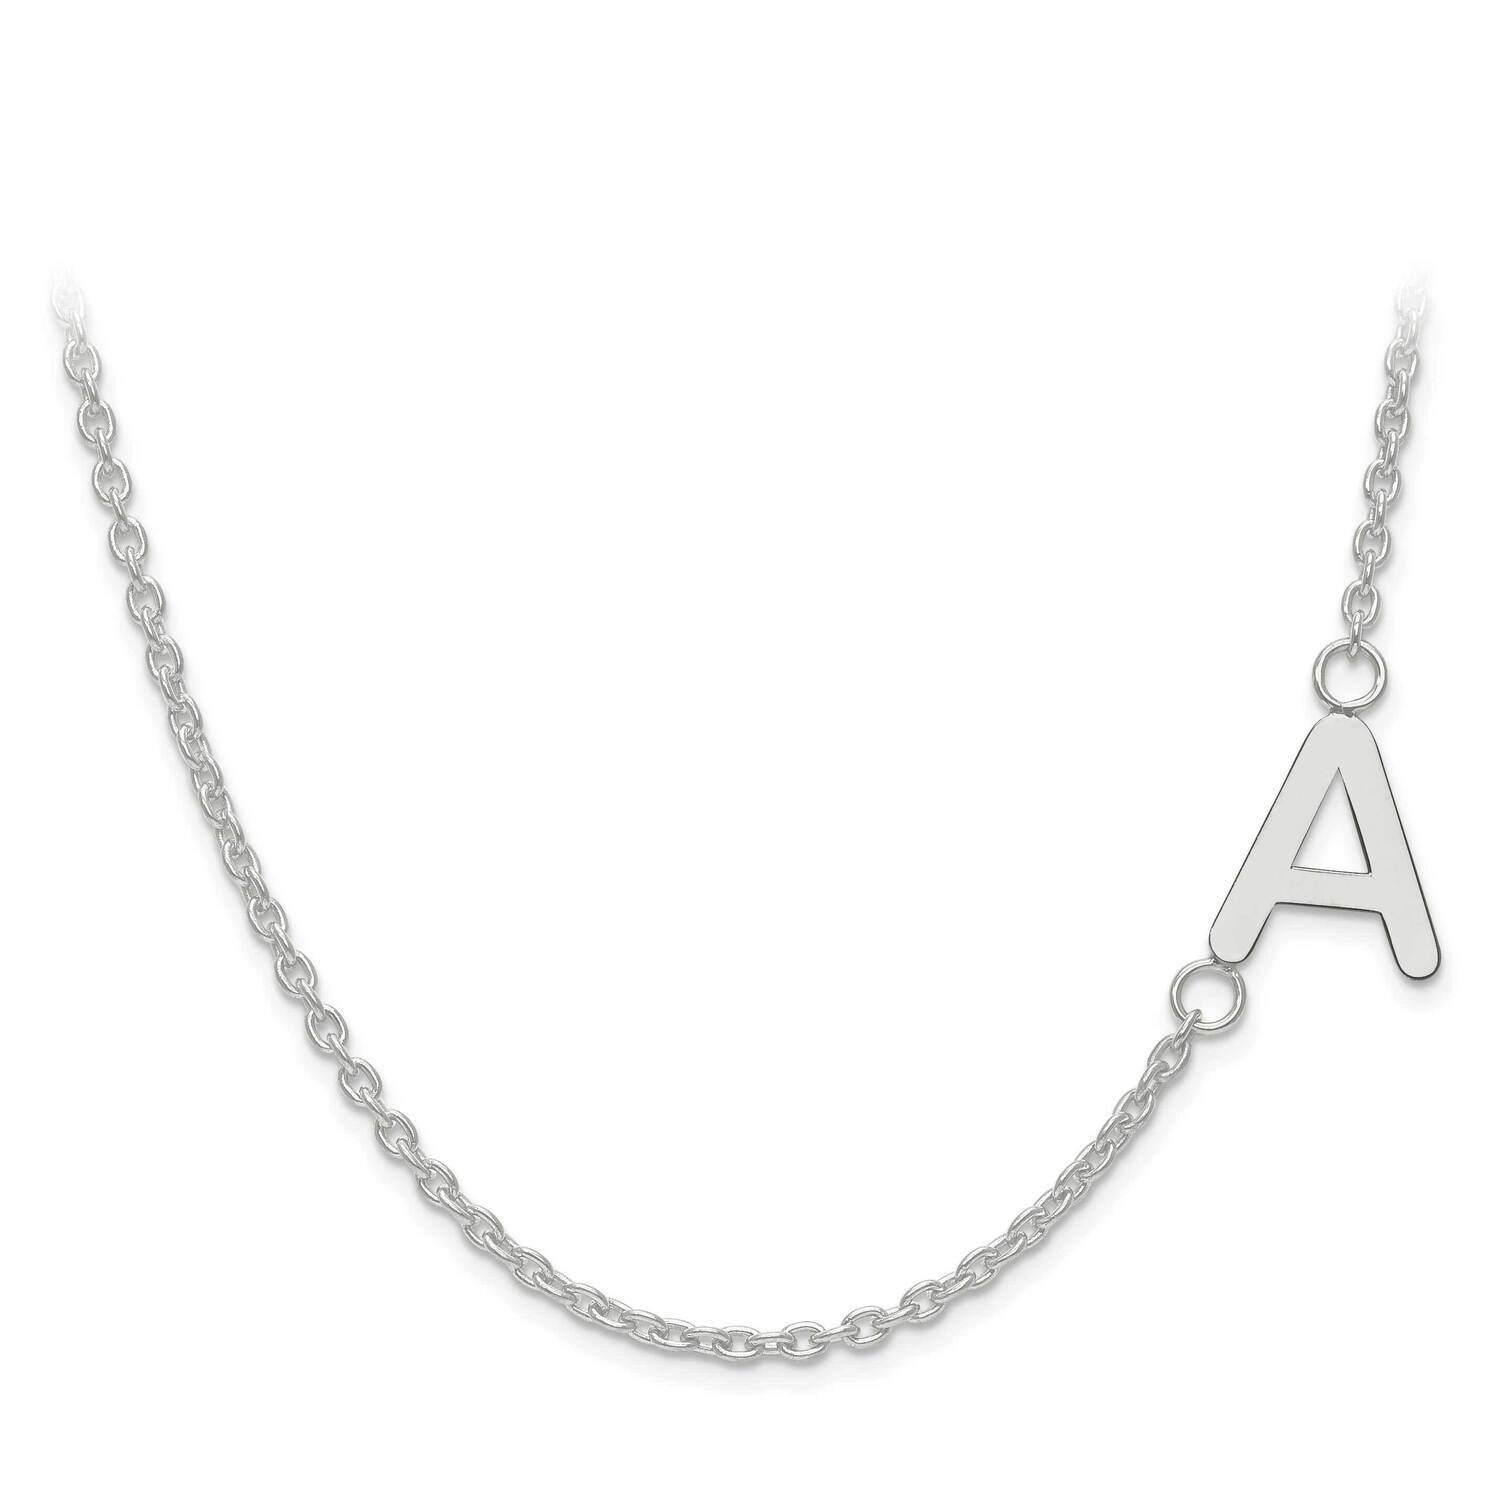 S Laser Sideways Letter Initial Offset Necklace with Chain Sterling Silver Rhodium-plated XNA660SS